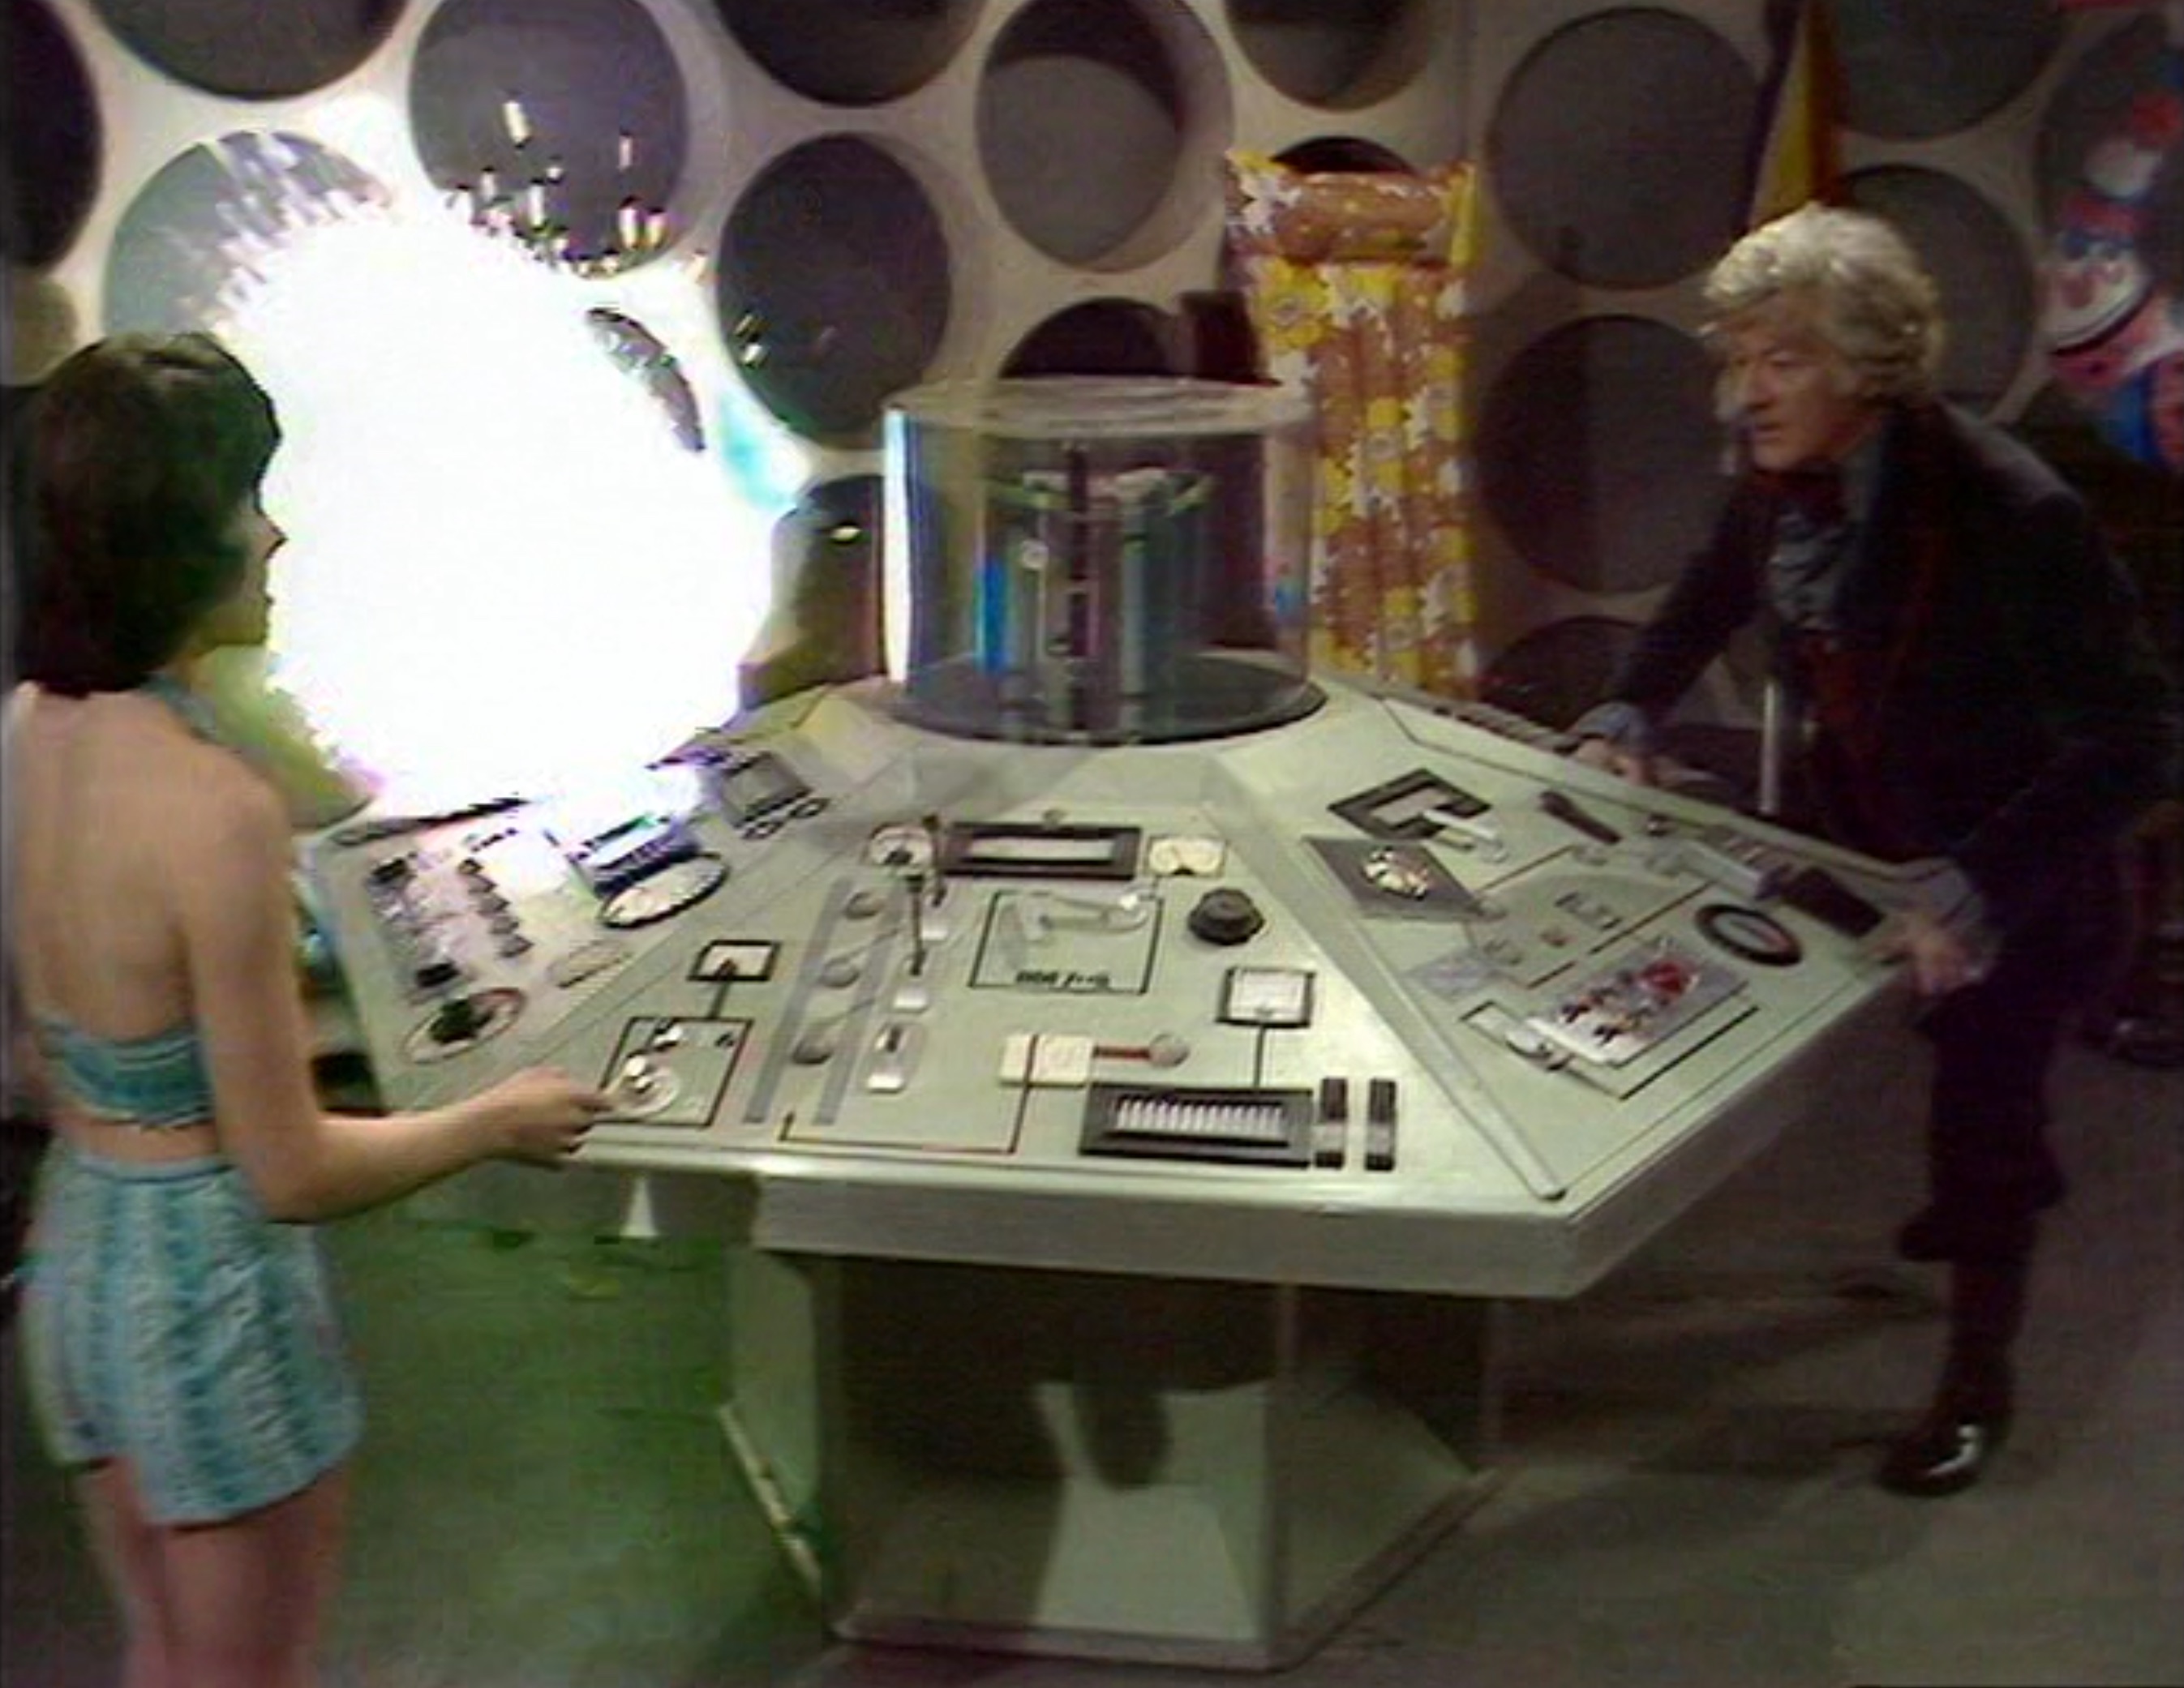 The TARDIS console explodes as it encounters the Exxilon beacon. (TV: Death to the Daleks [+]Loading...["Death to the Daleks (TV story)"])